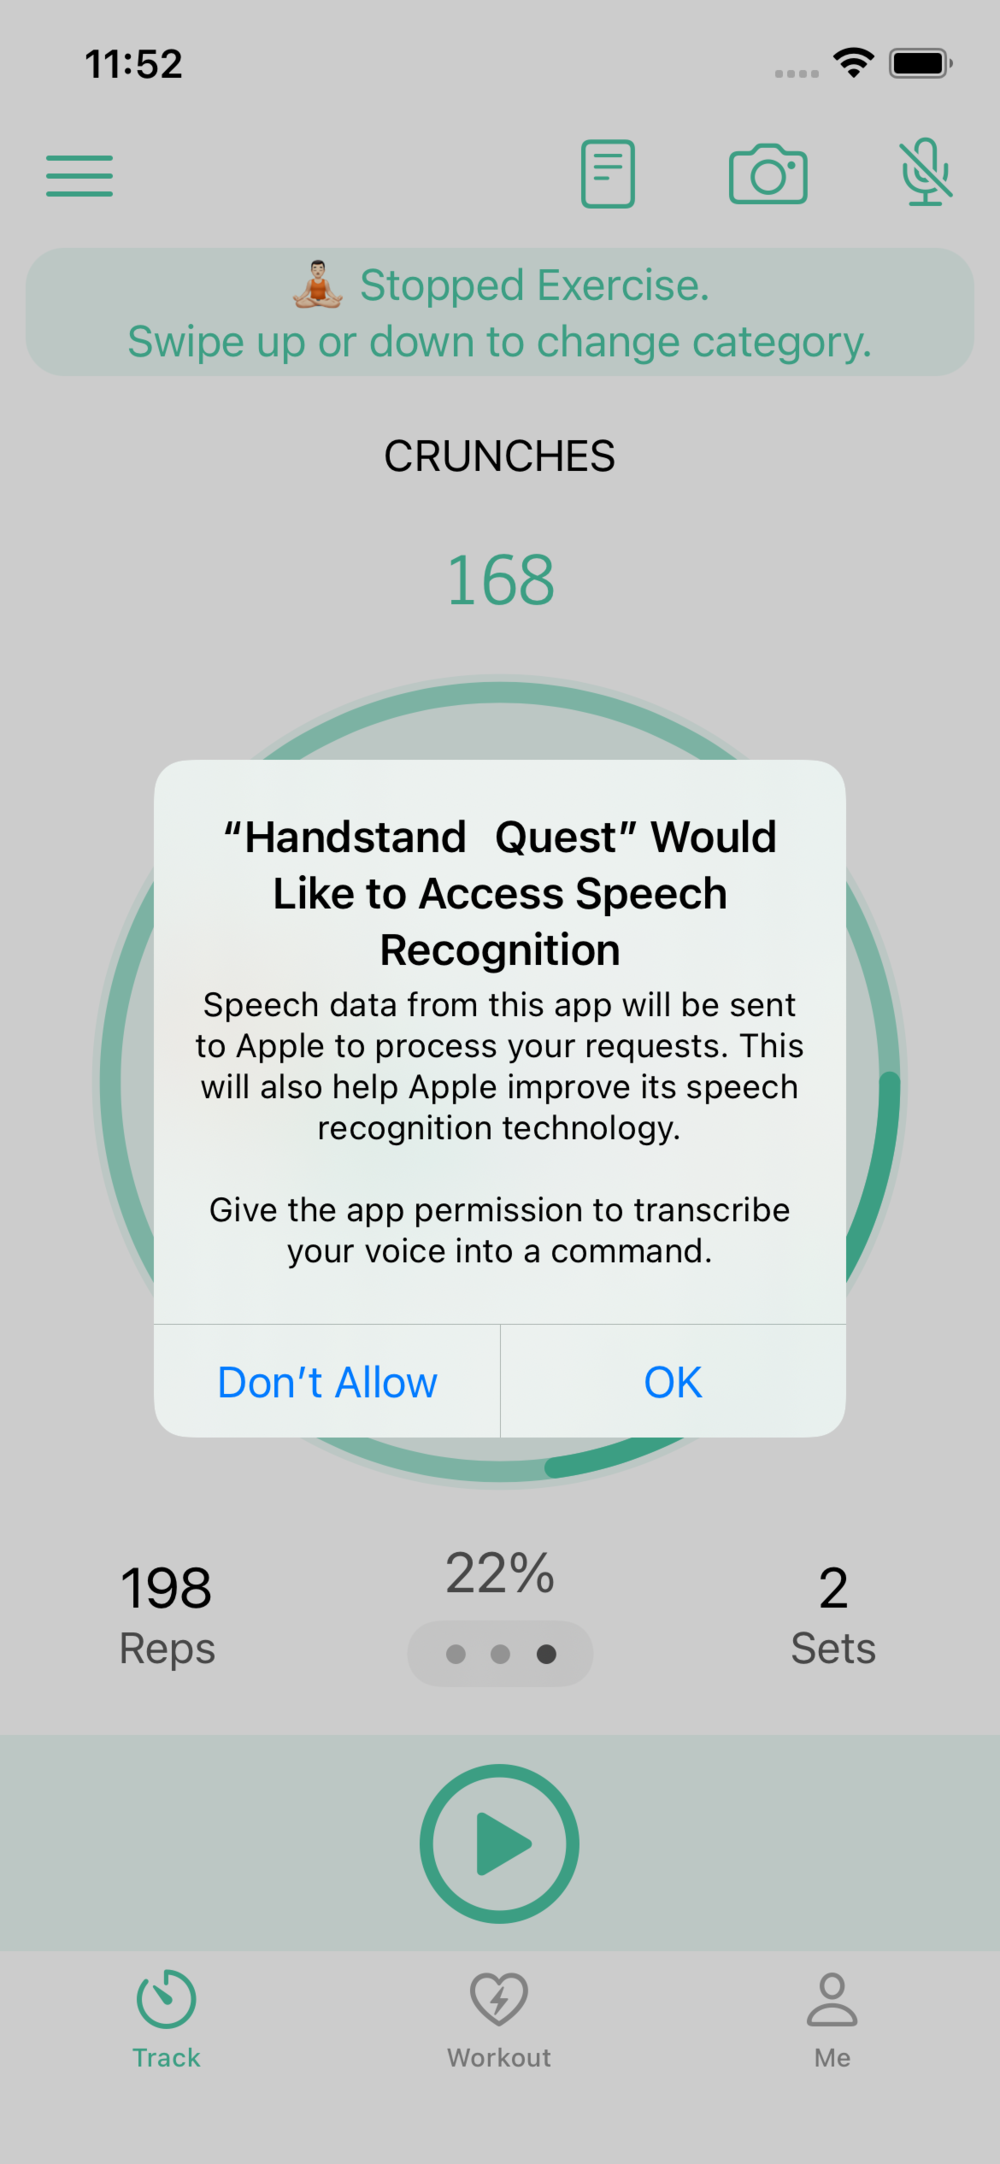 when mic is clicked the first time, the app requests access to speech recognition